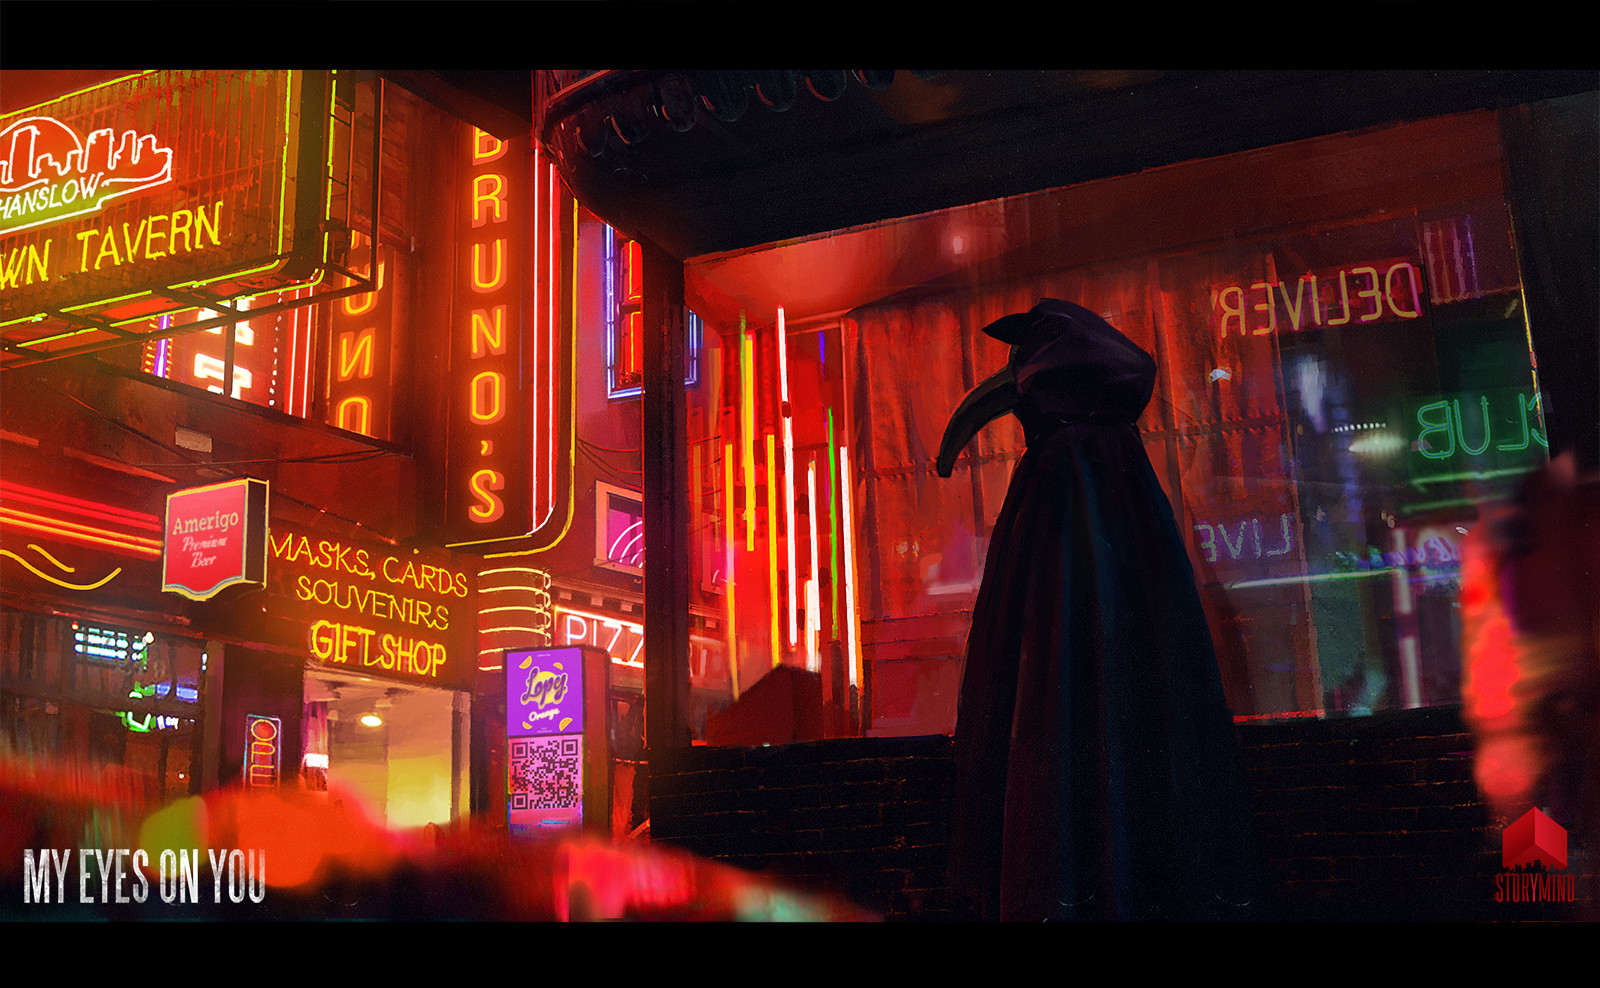 Neo-noir-inspired Conceptual Illustrations by Tony Skeor